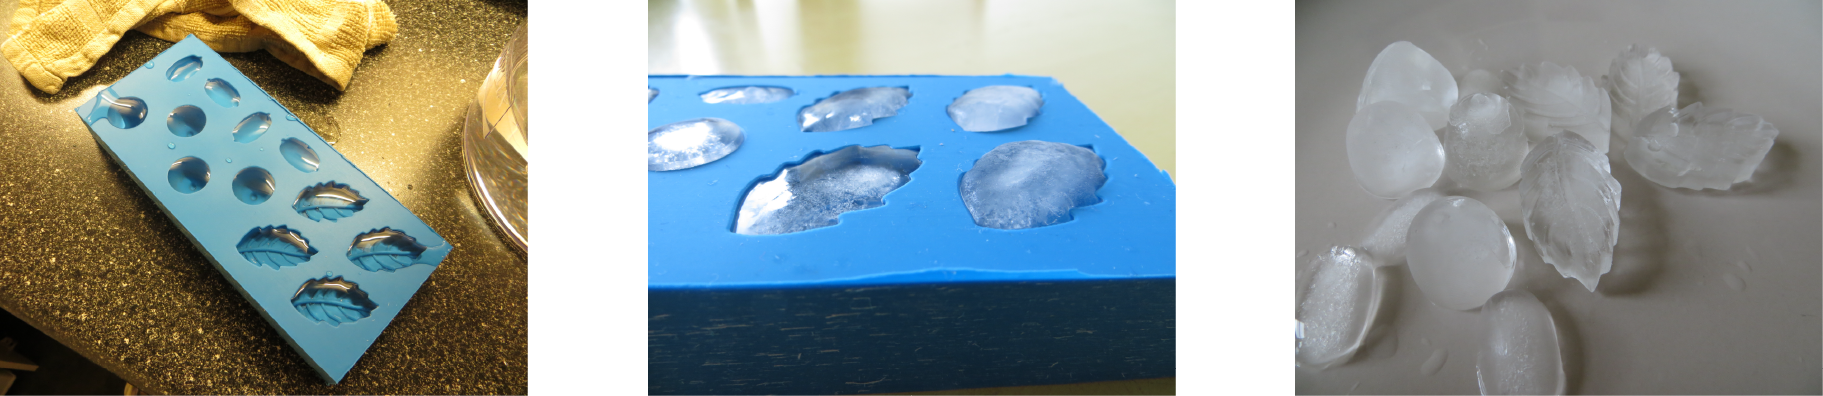 final ice mold and ice cubes